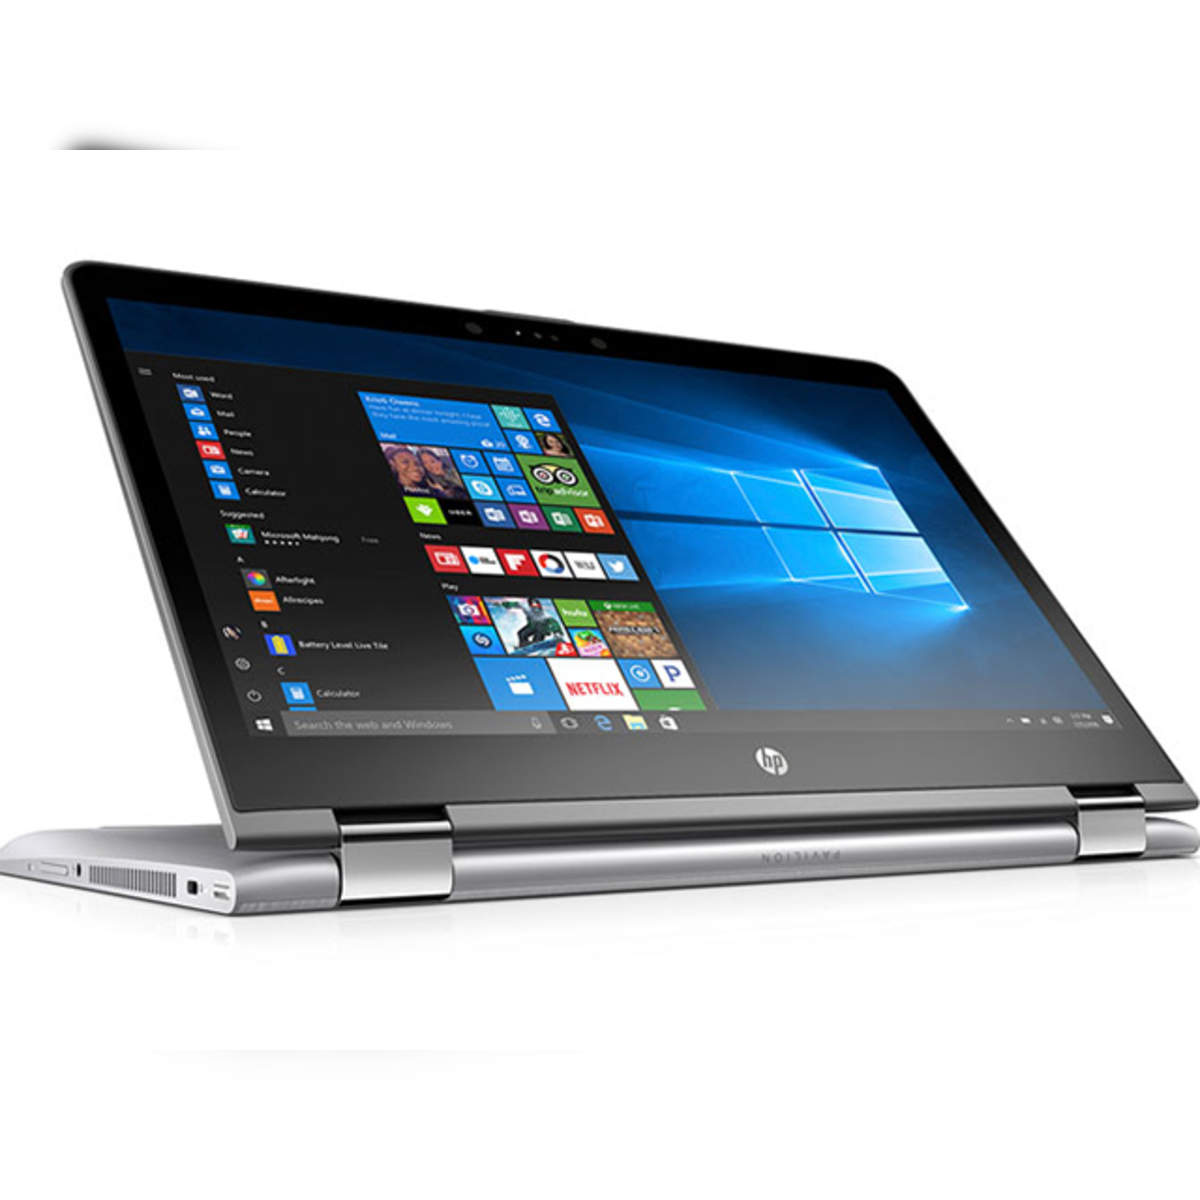 In Stock HP® Pavilion x360 Convertible Laptop